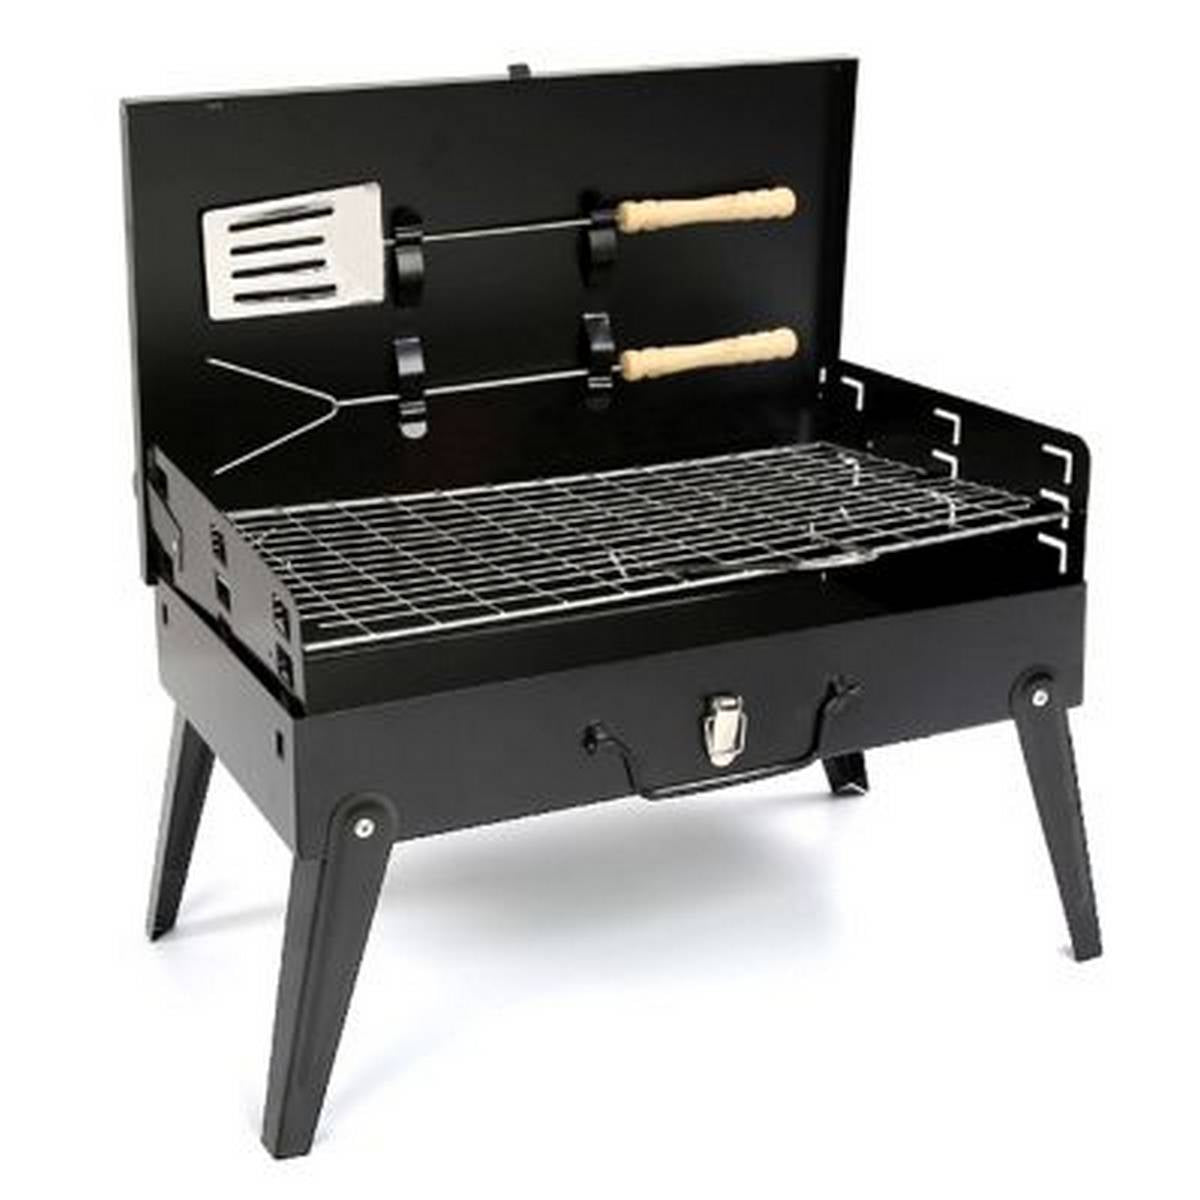 REDWOOD PORTABLE FOLDING CHARCOAL BBQ GRILL WITH ACCESSORIES BB-BBQ225